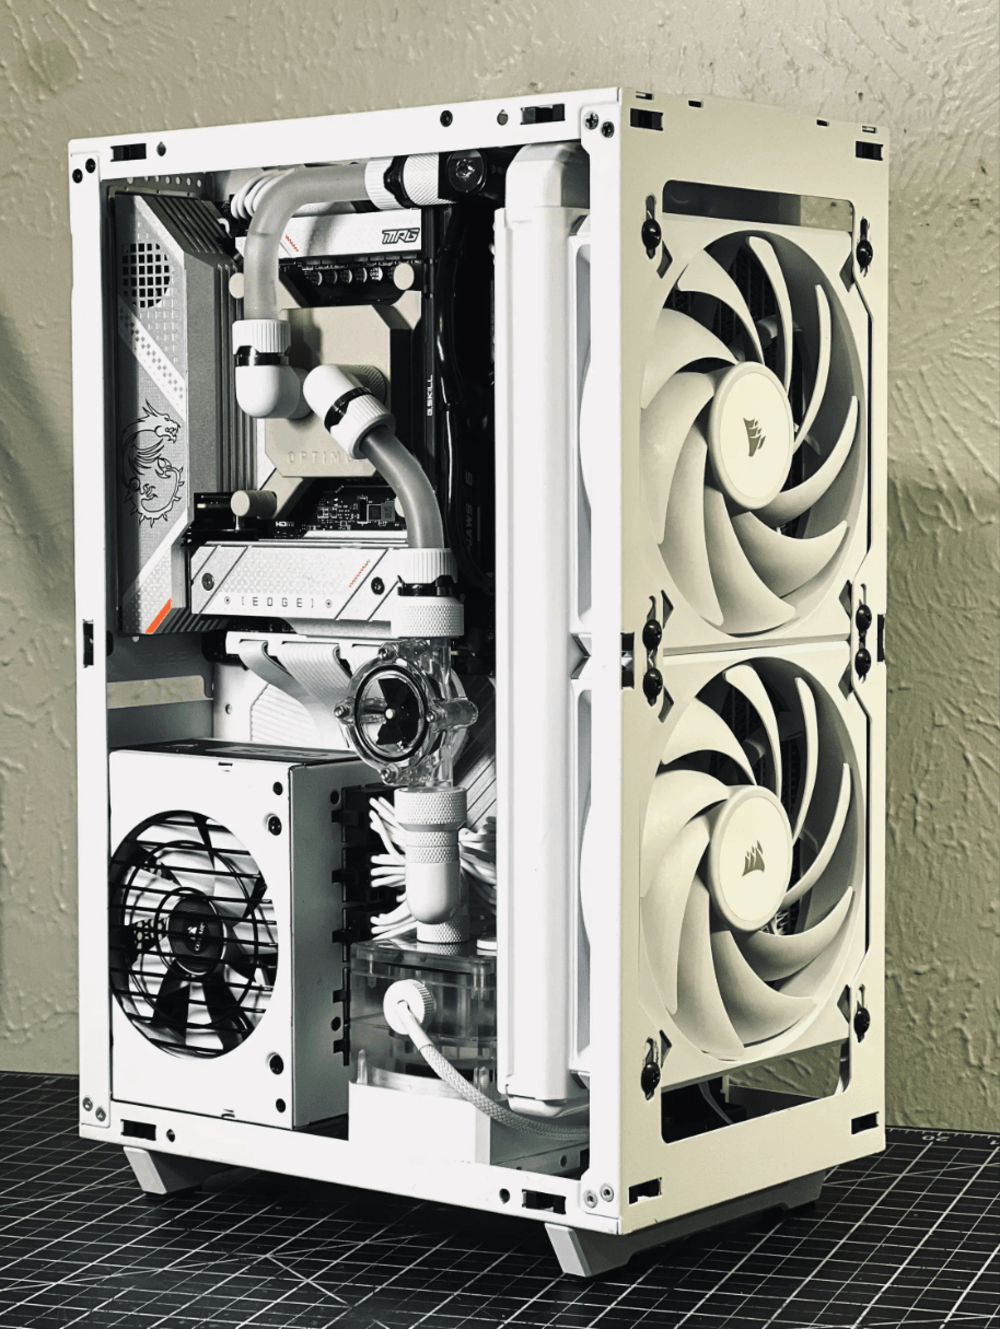 Custom Water Cooled ITX Prebuilt? Yes Please! post image